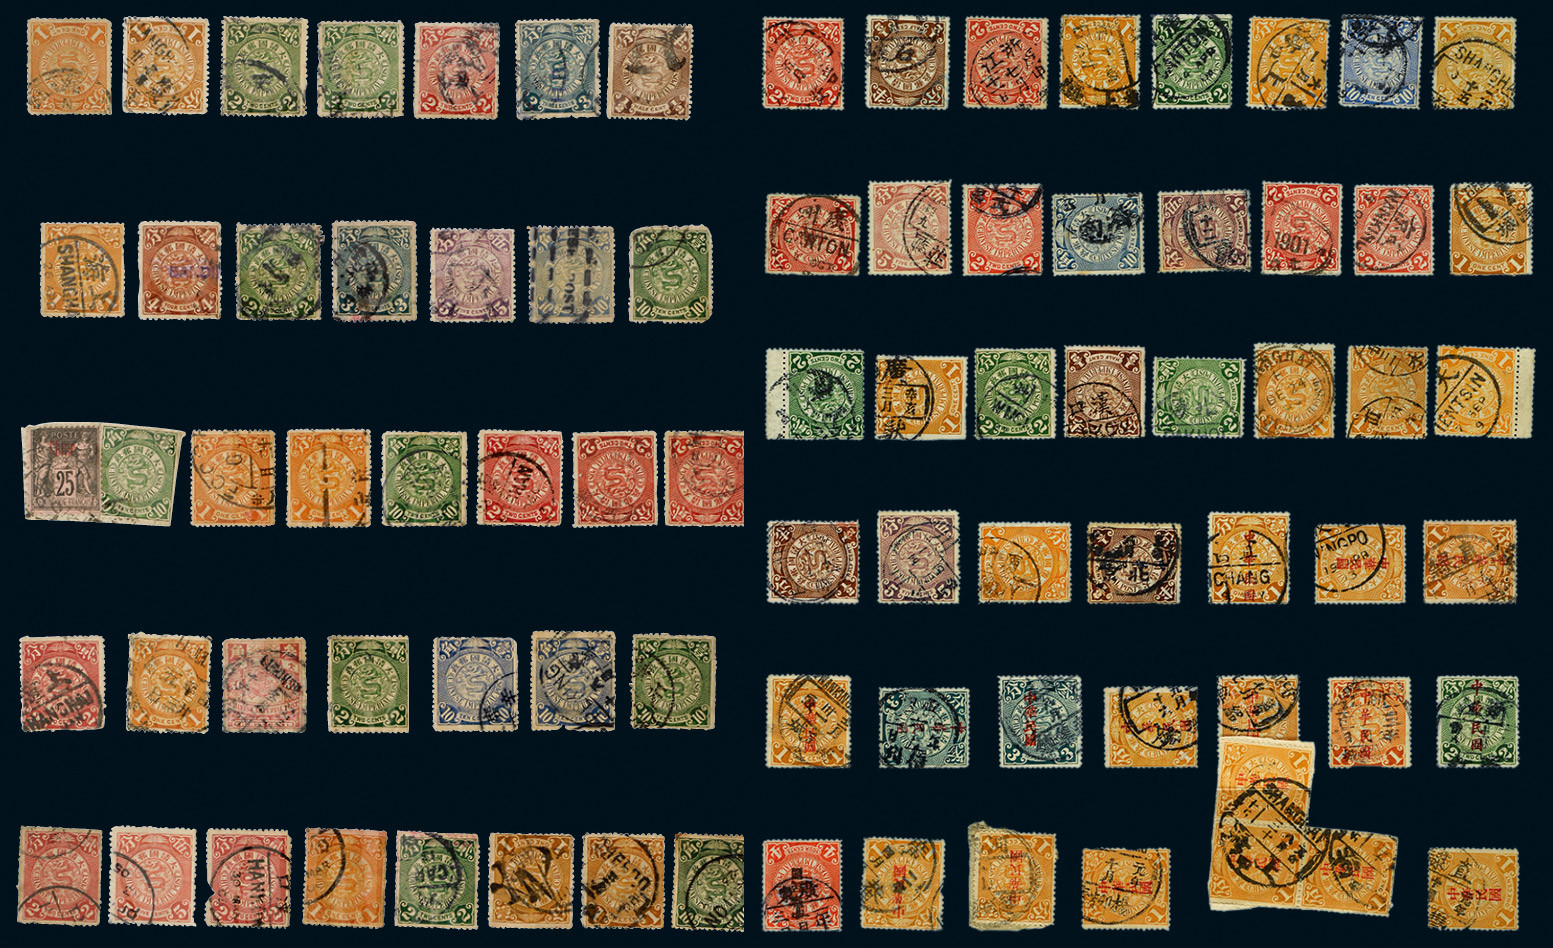 Qing dynasty group of 103 coiling dragons used. Showing different cancellation. Very fine.